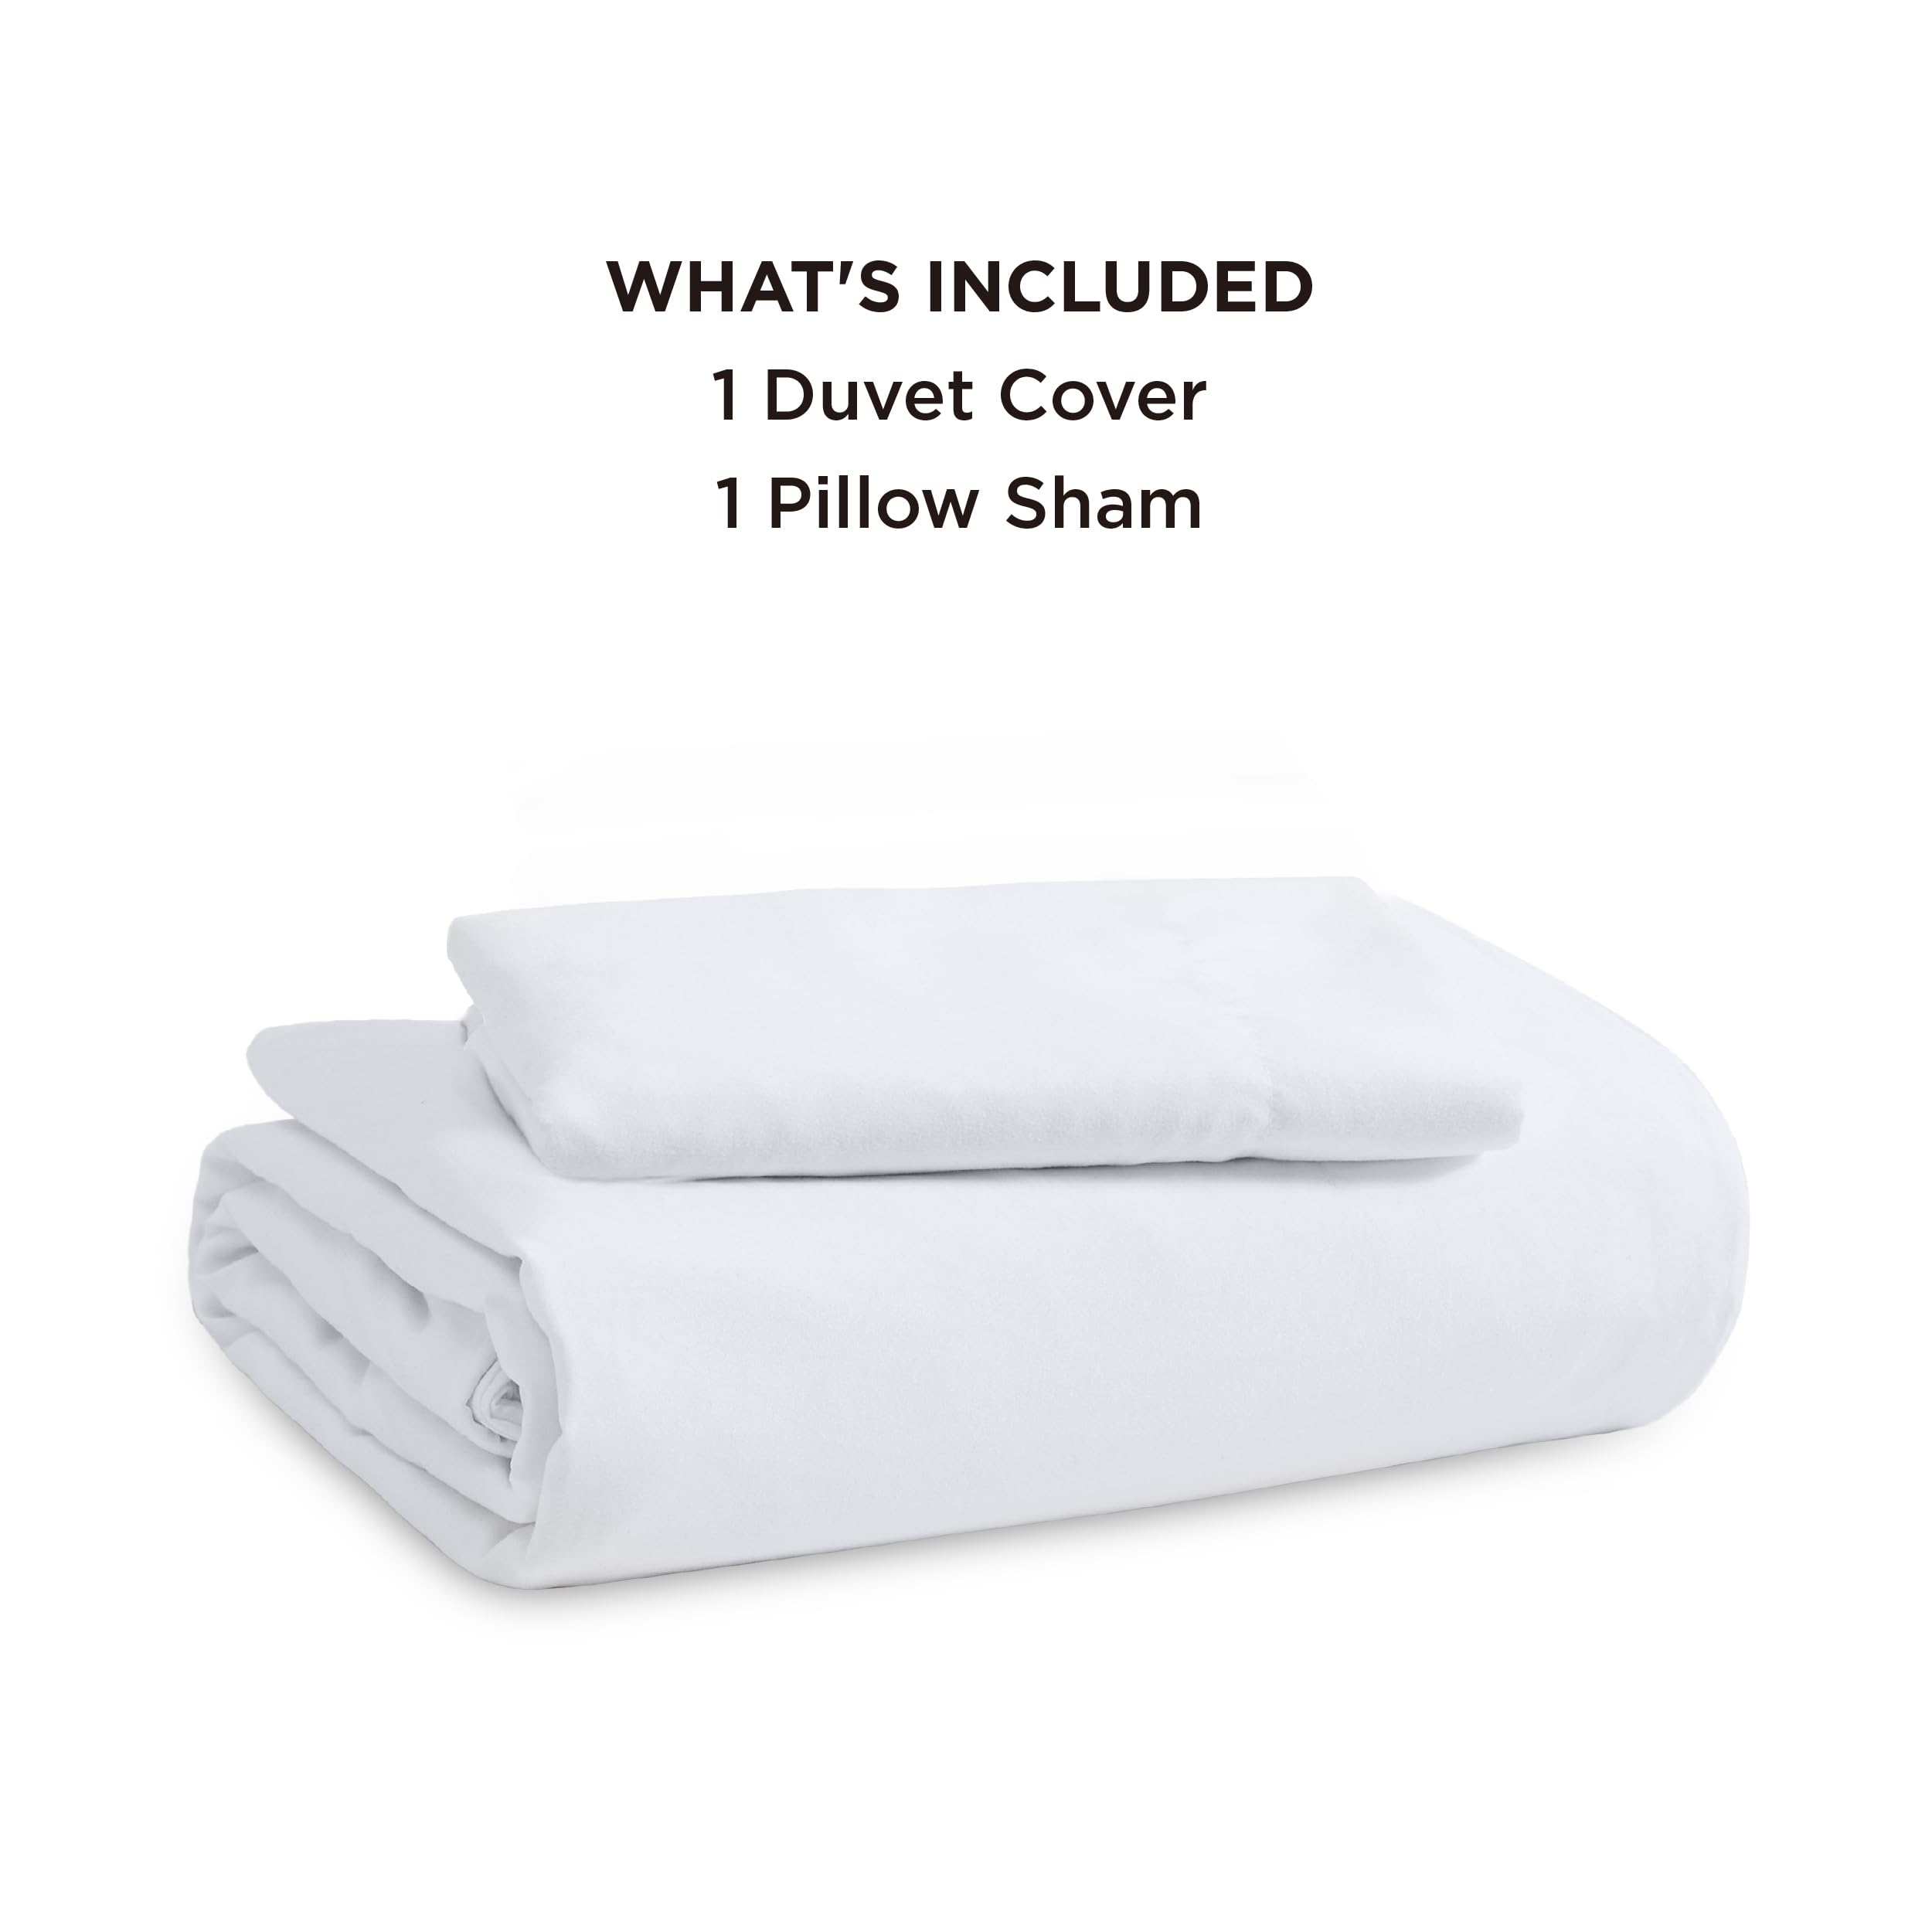 Bedsure White Duvet Cover Queen Size - Soft Prewashed Queen Duvet Cover Set, 3 Pieces, 1 Duvet Cover 90x90 Inches with Zipper Closure and 2 Pillow Shams, Comforter Not Included